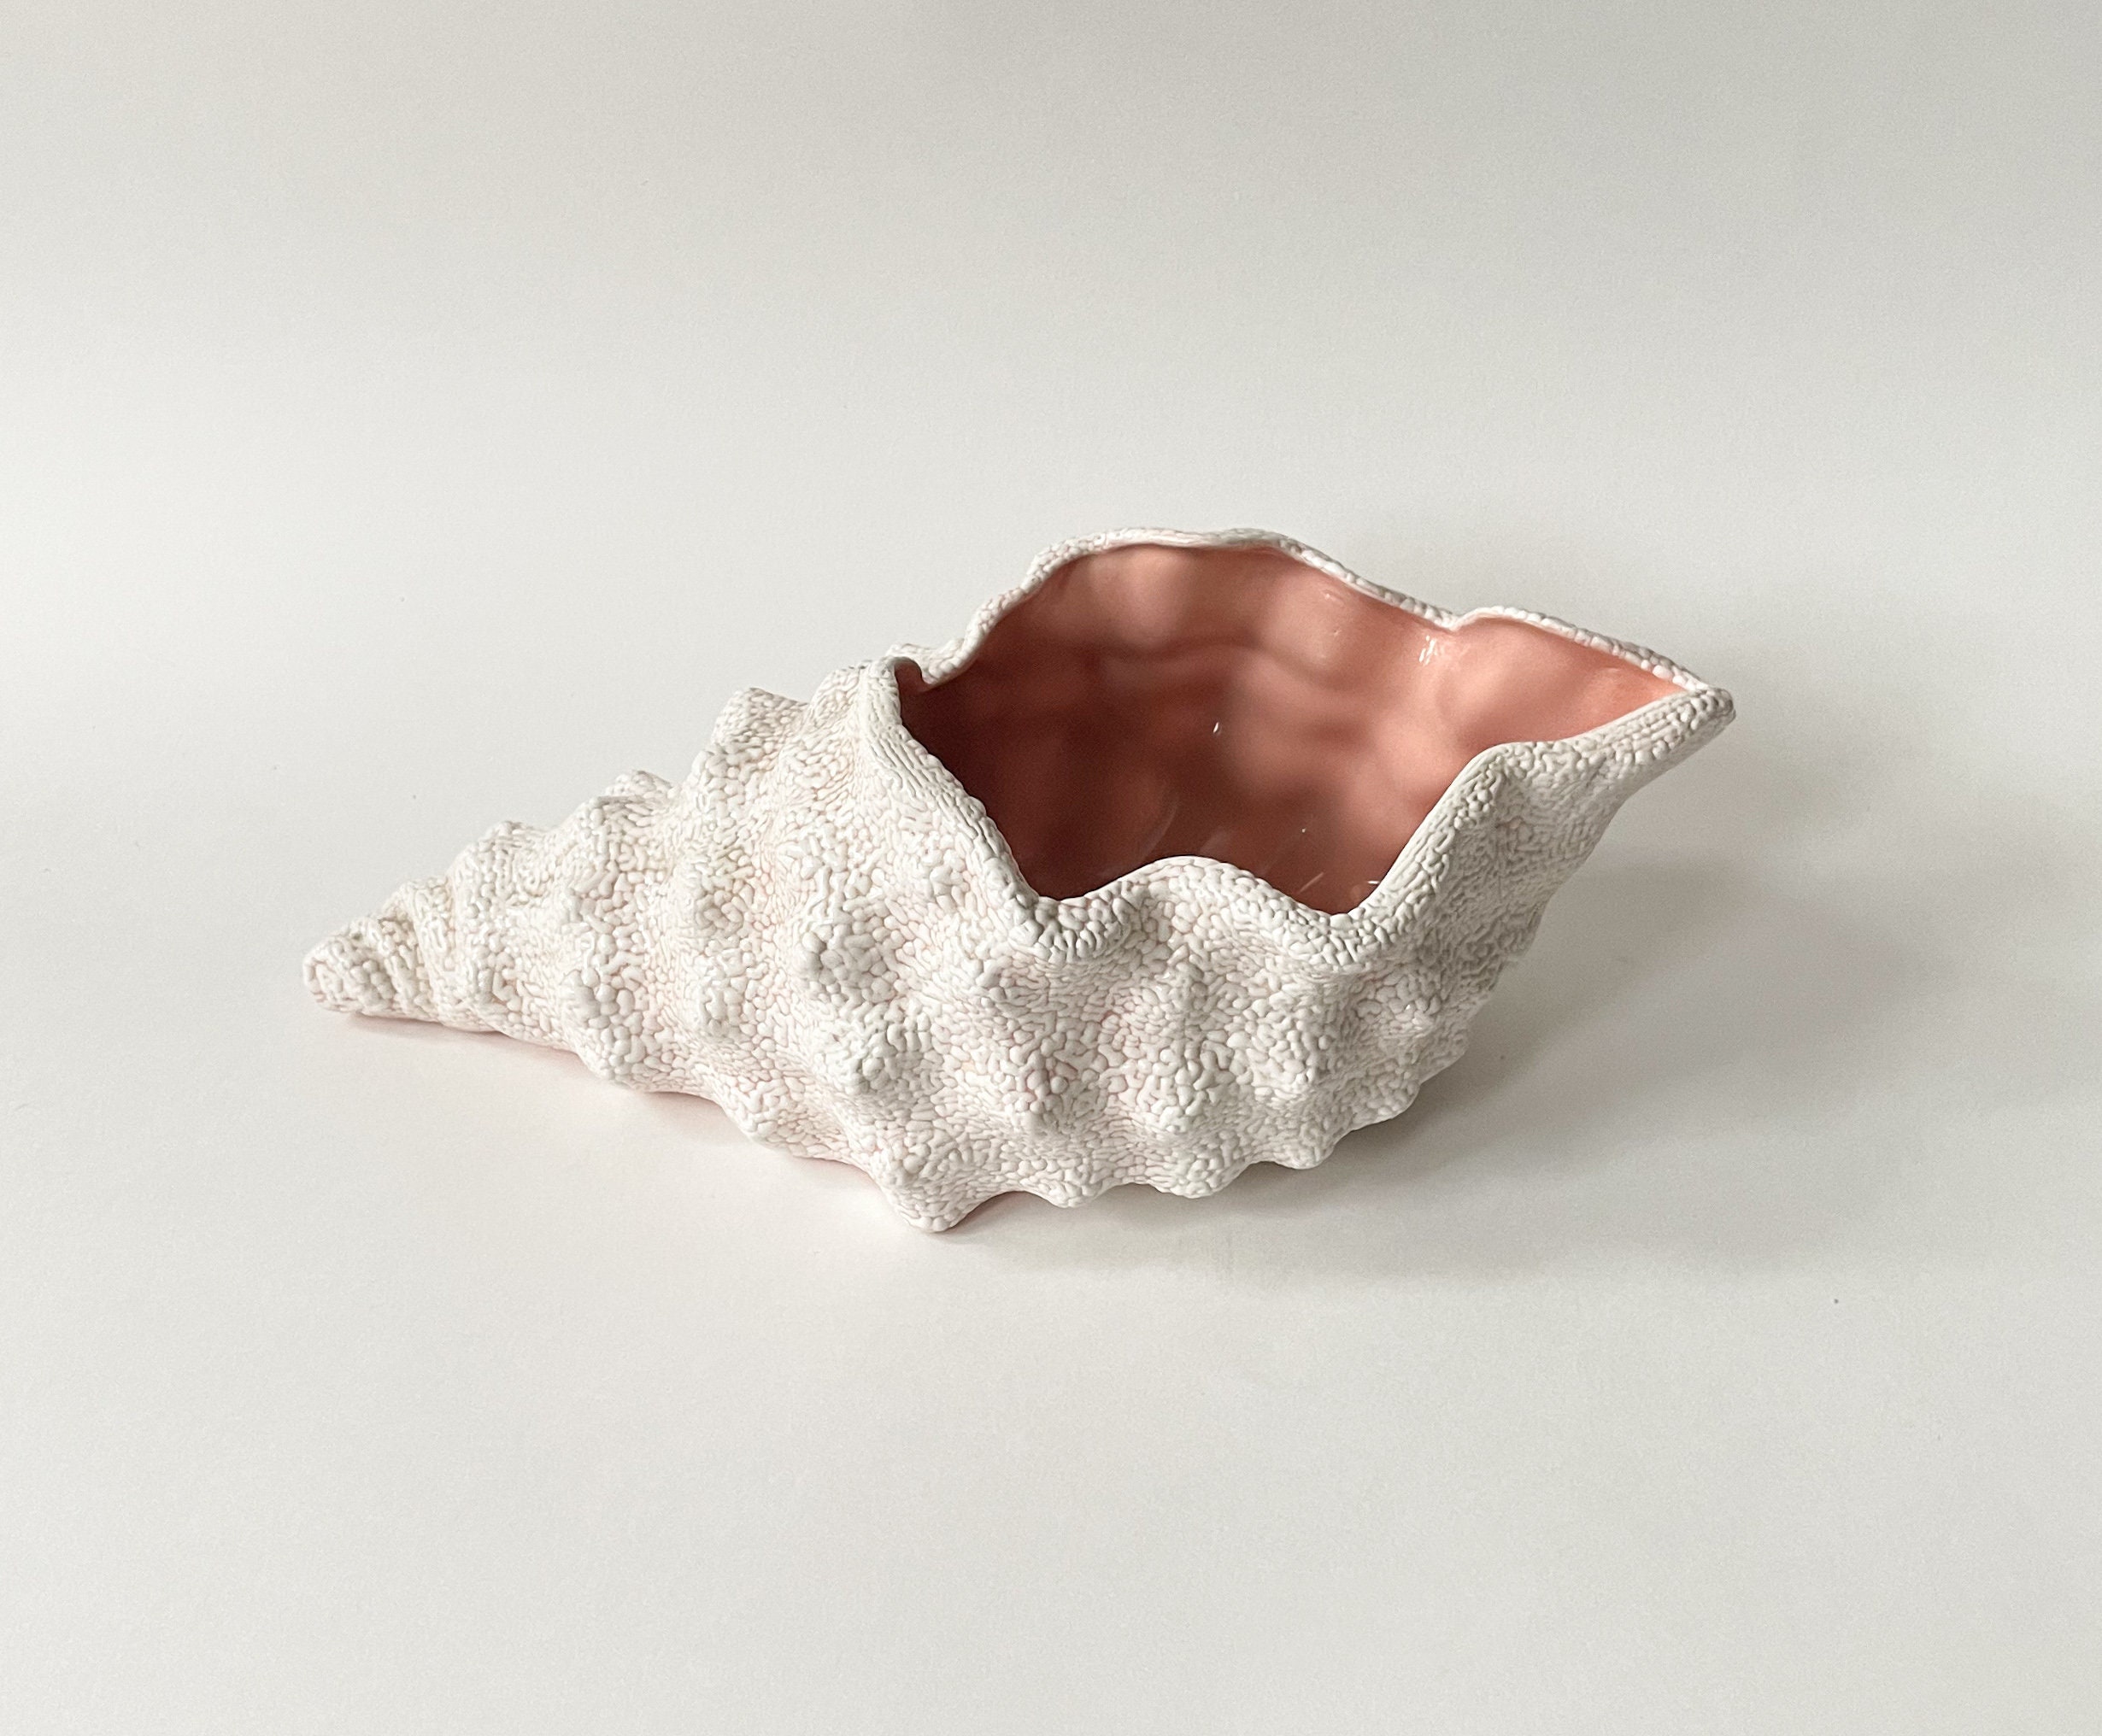 Shell Planter Large Pink